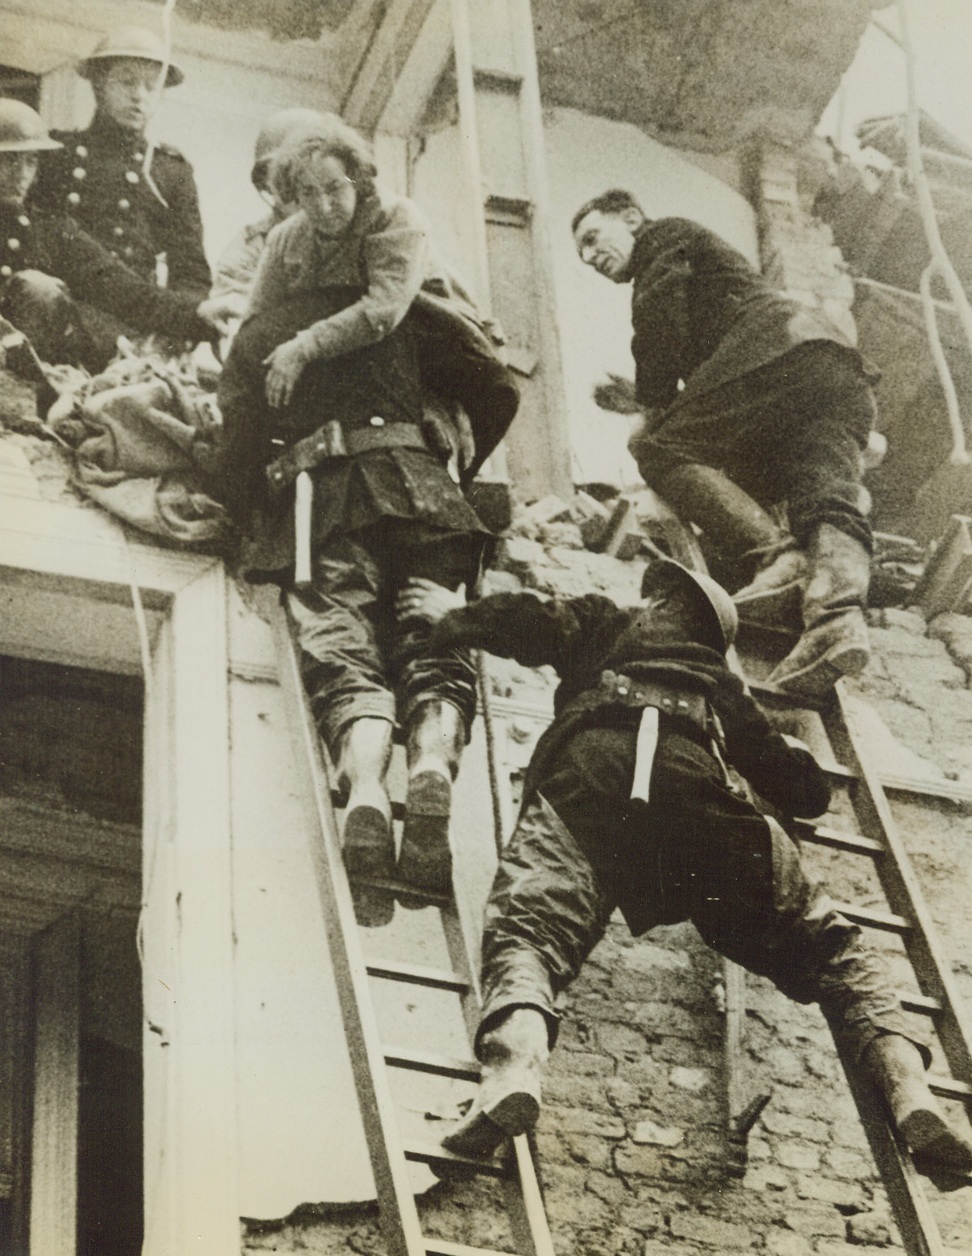 Rescue, 6/28/1944. England – After a pilotless Nazi plane crashed on a house in southern England, its occupants were rescued by firemen and wardens. Here a woman is carried down a ladder from the house. Credit: ACME;